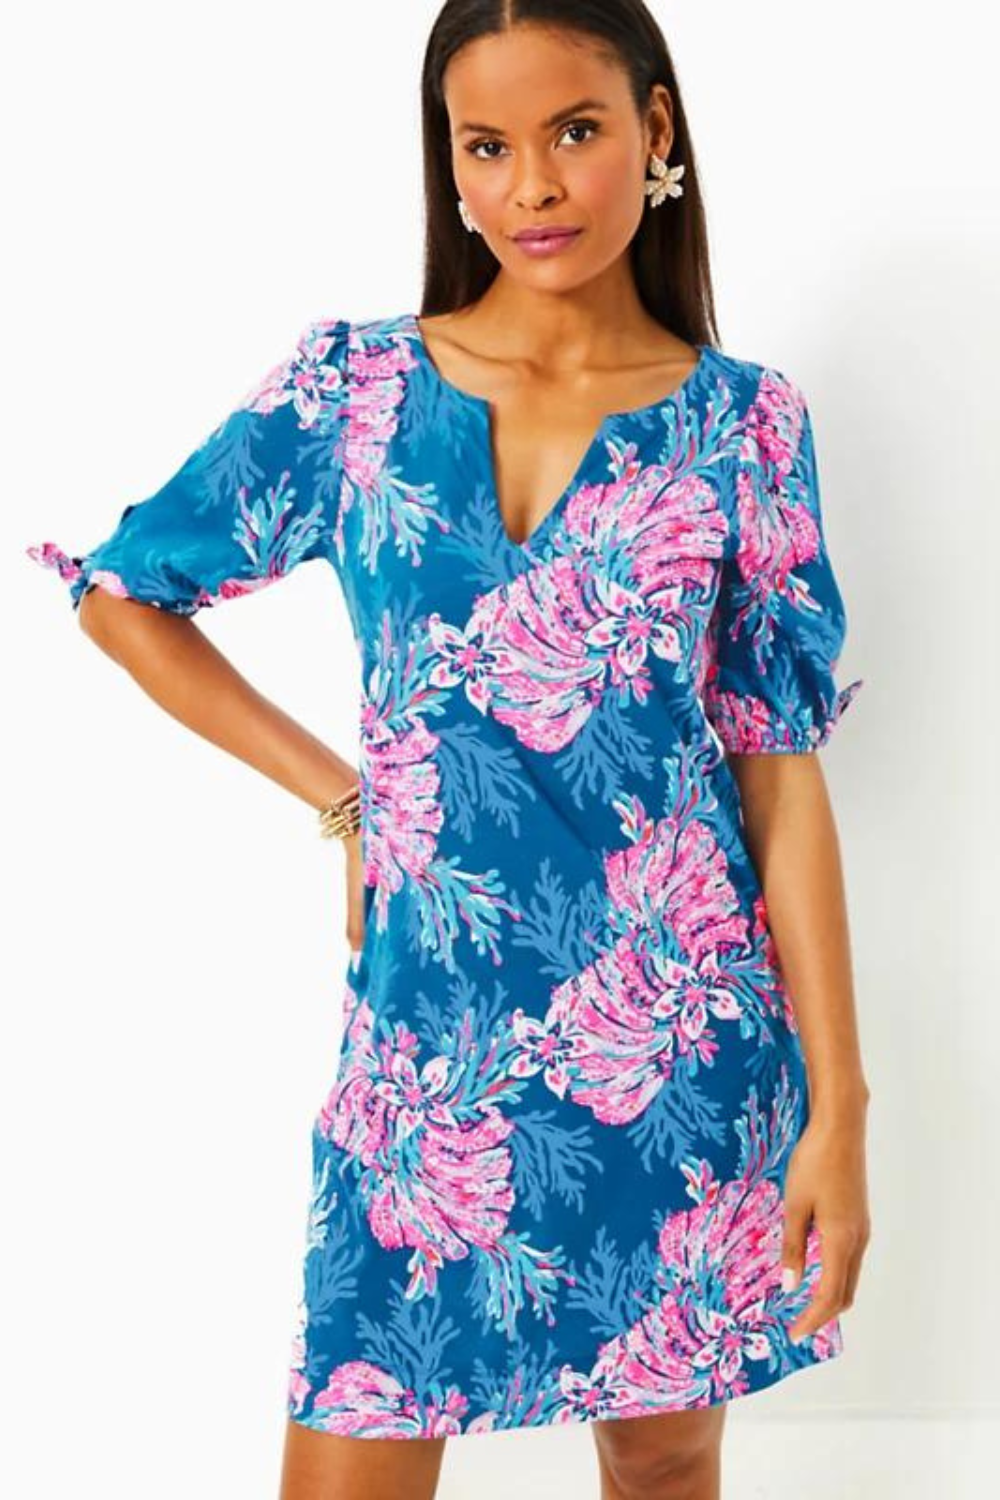 Lilly Pulitzer Easley Short Sleeve Dress - For the Fans